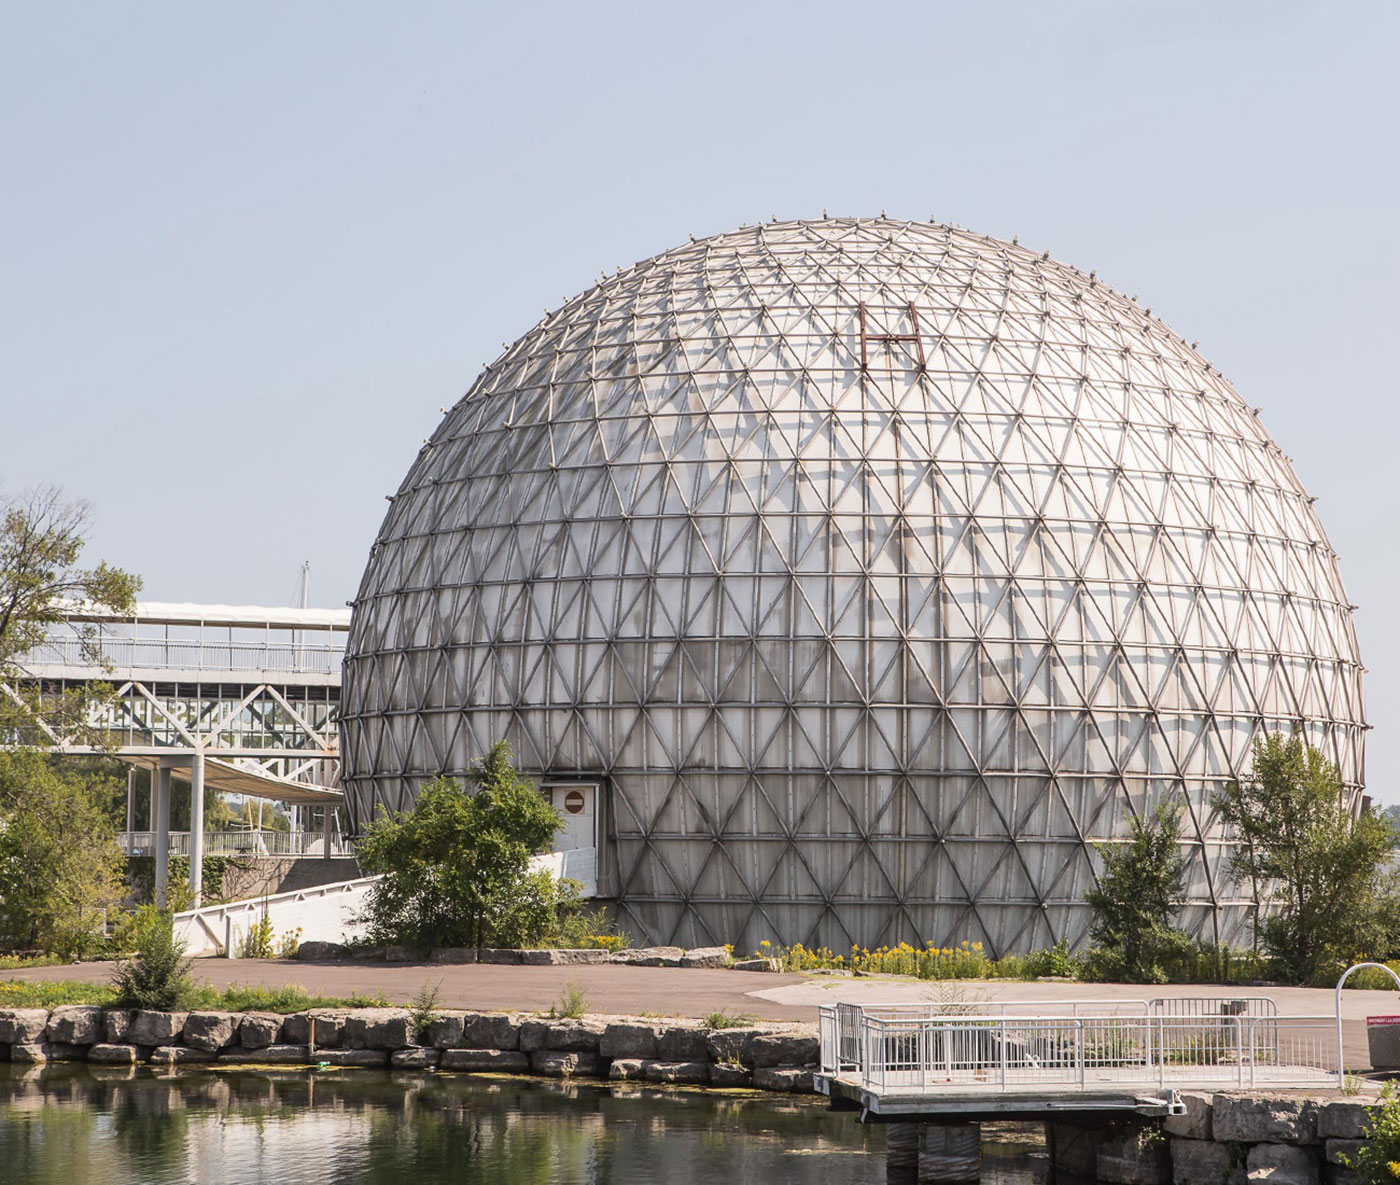 Cinesphere at Ontario Place